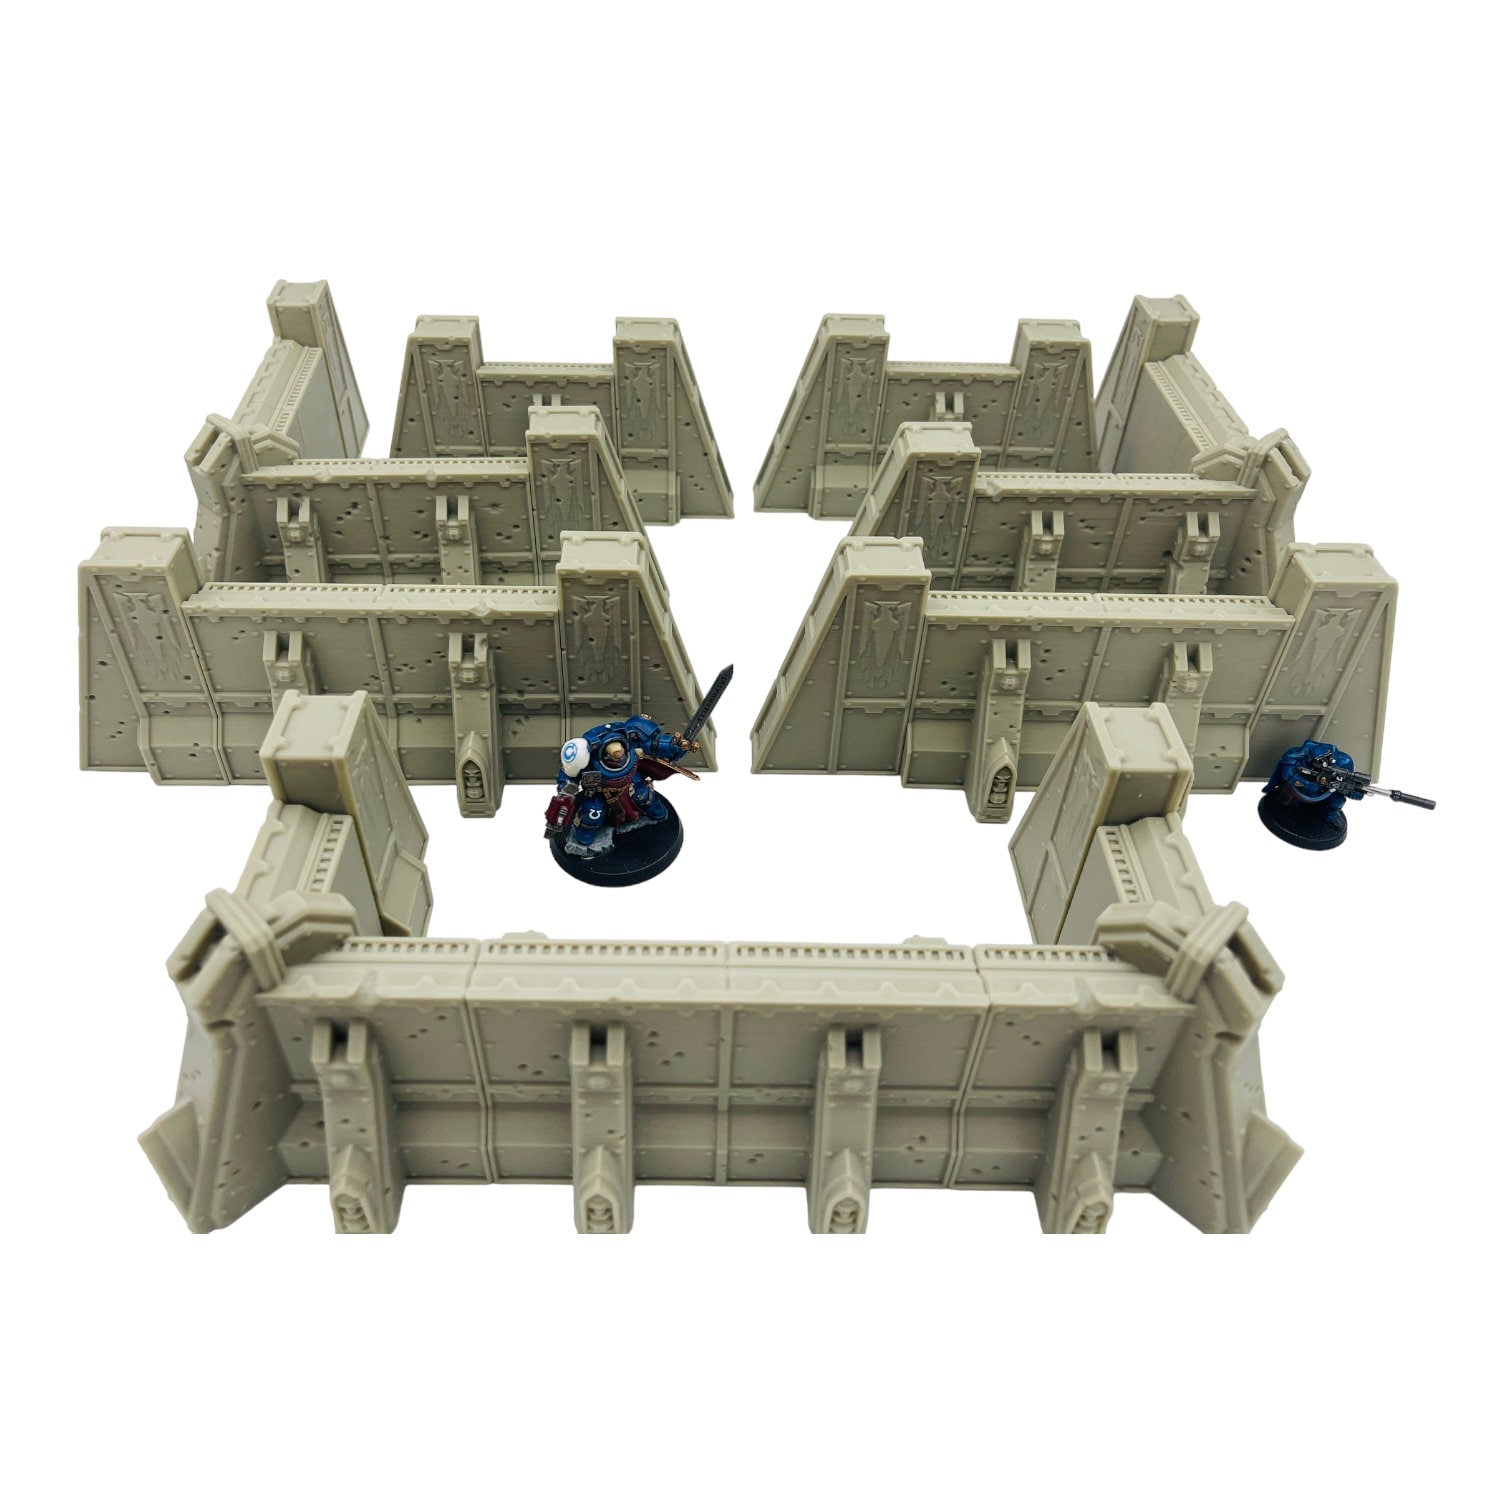 Ruins of the Empire Fortification Walls / Forbidden Prints / RPG and Wargame 3d Printed Tabletop Terrain / Licensed Printer